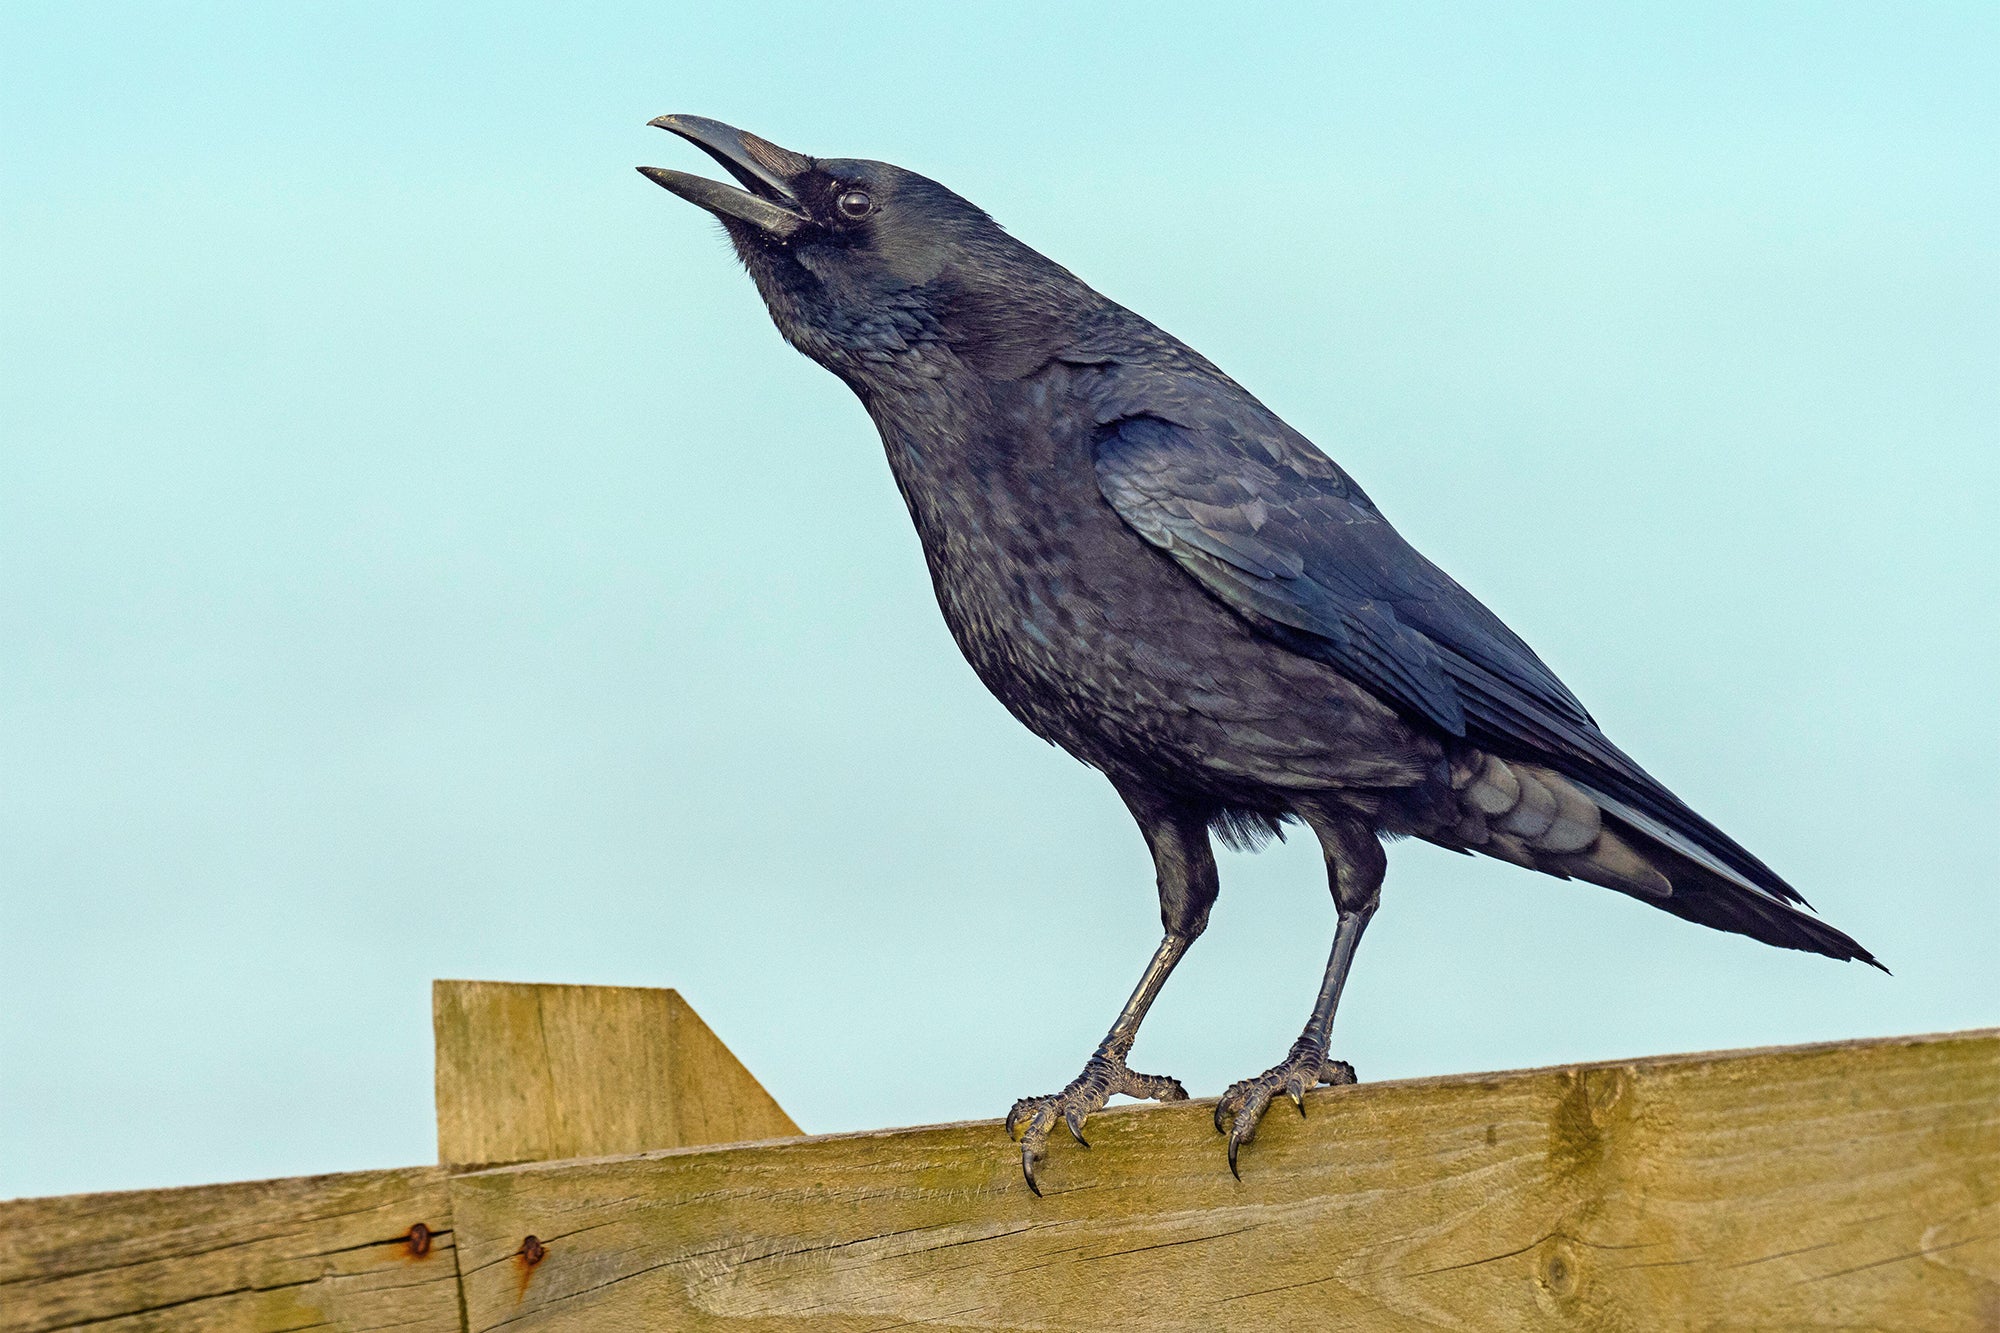 Black crow perched on wooden fence against blue sky